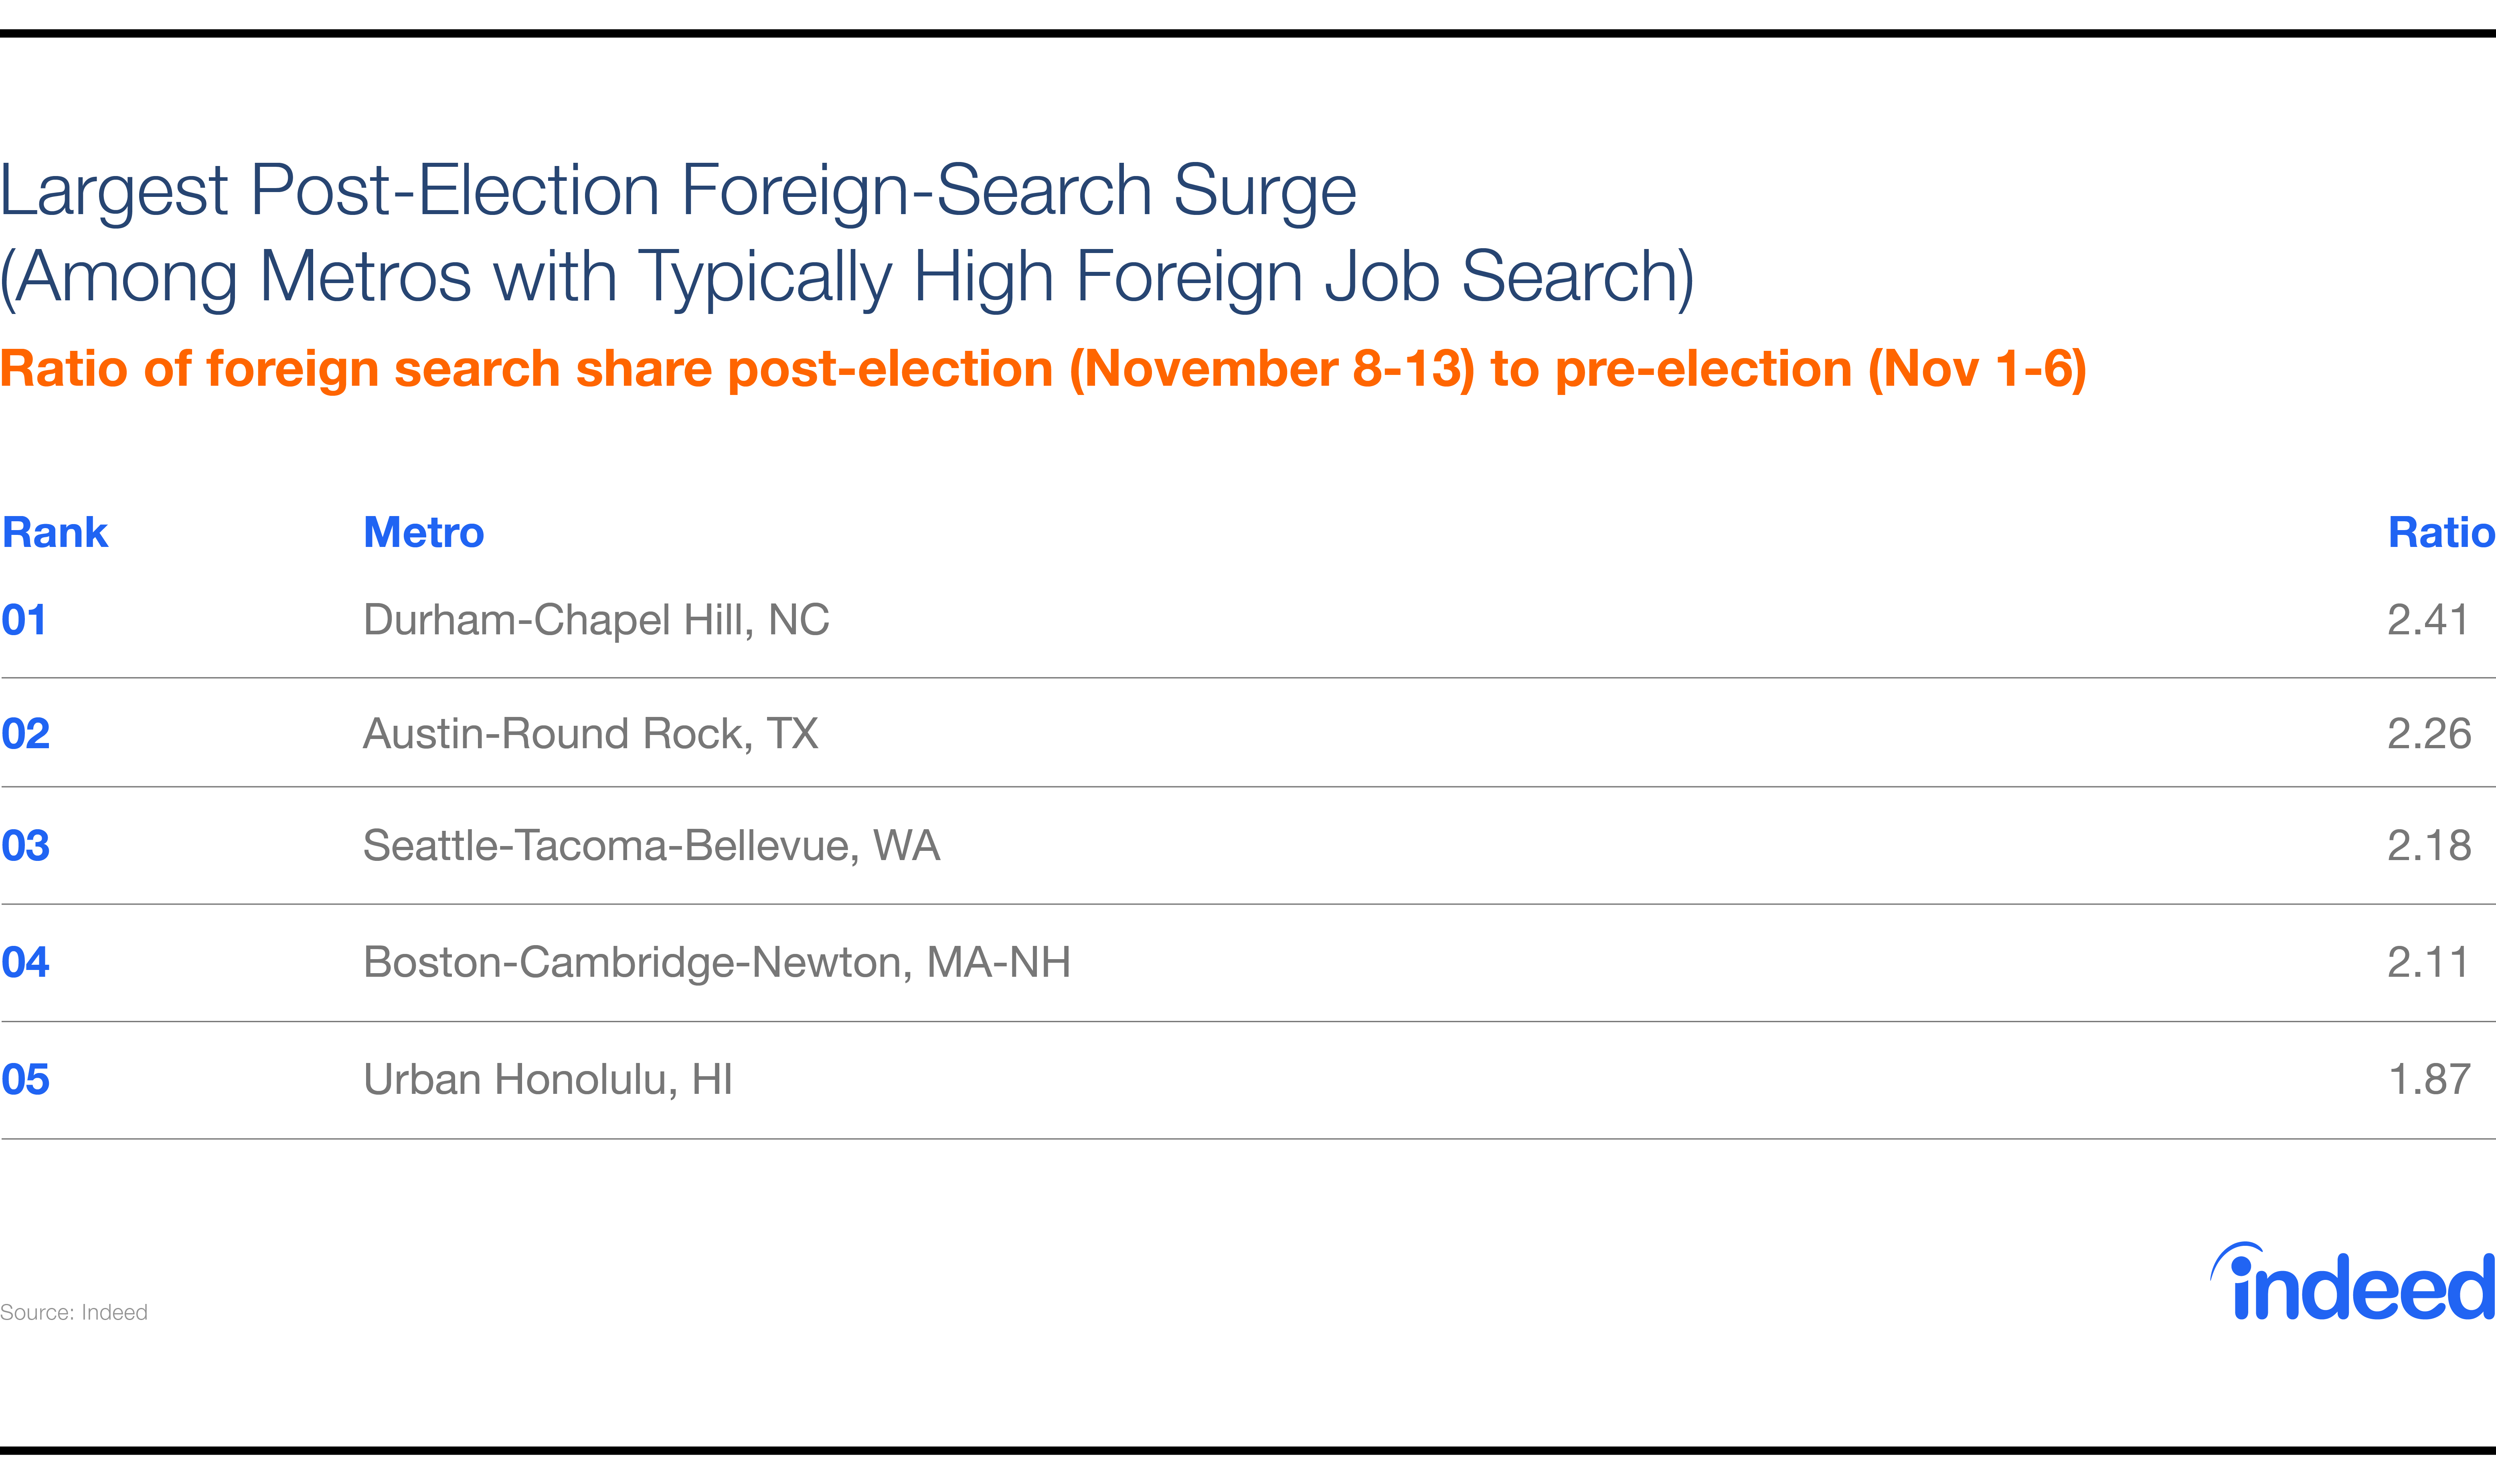 Largest Post-Election foreign-search surge (Among metros with typically high foreign job search)